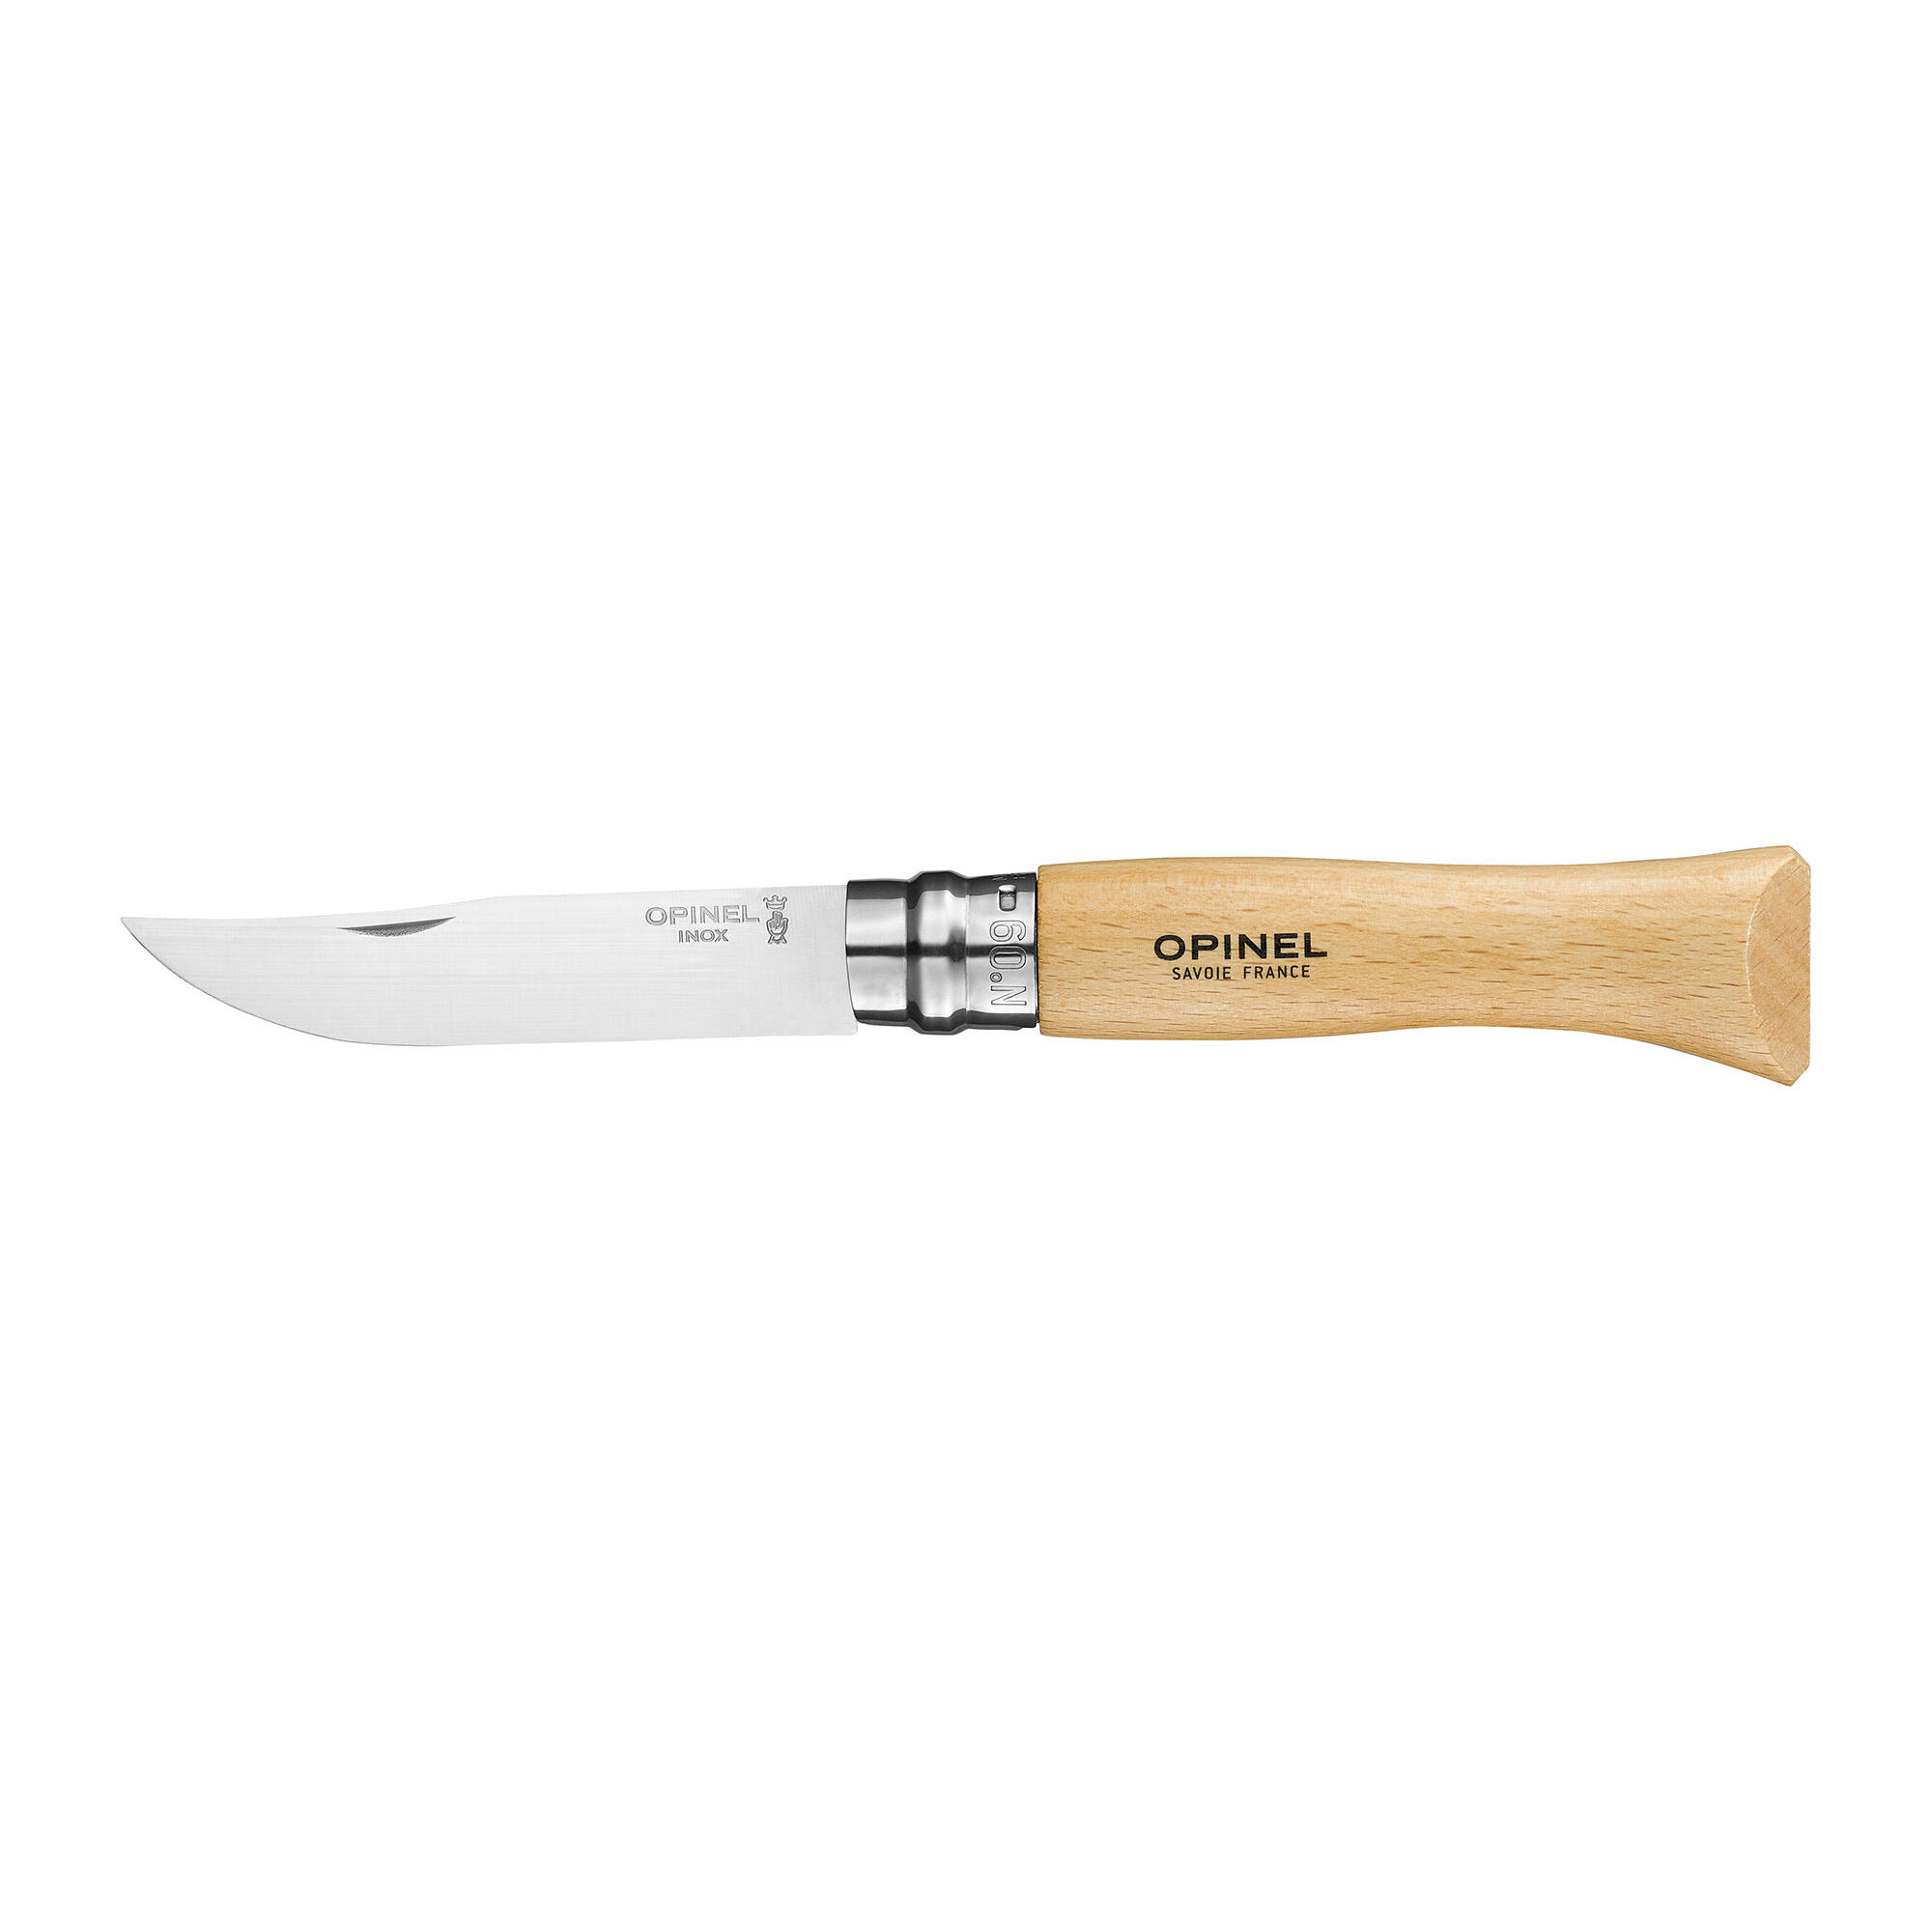 Image of Folding Stainless-Steel Hunting Knife 9 cm - Opinel No. 9